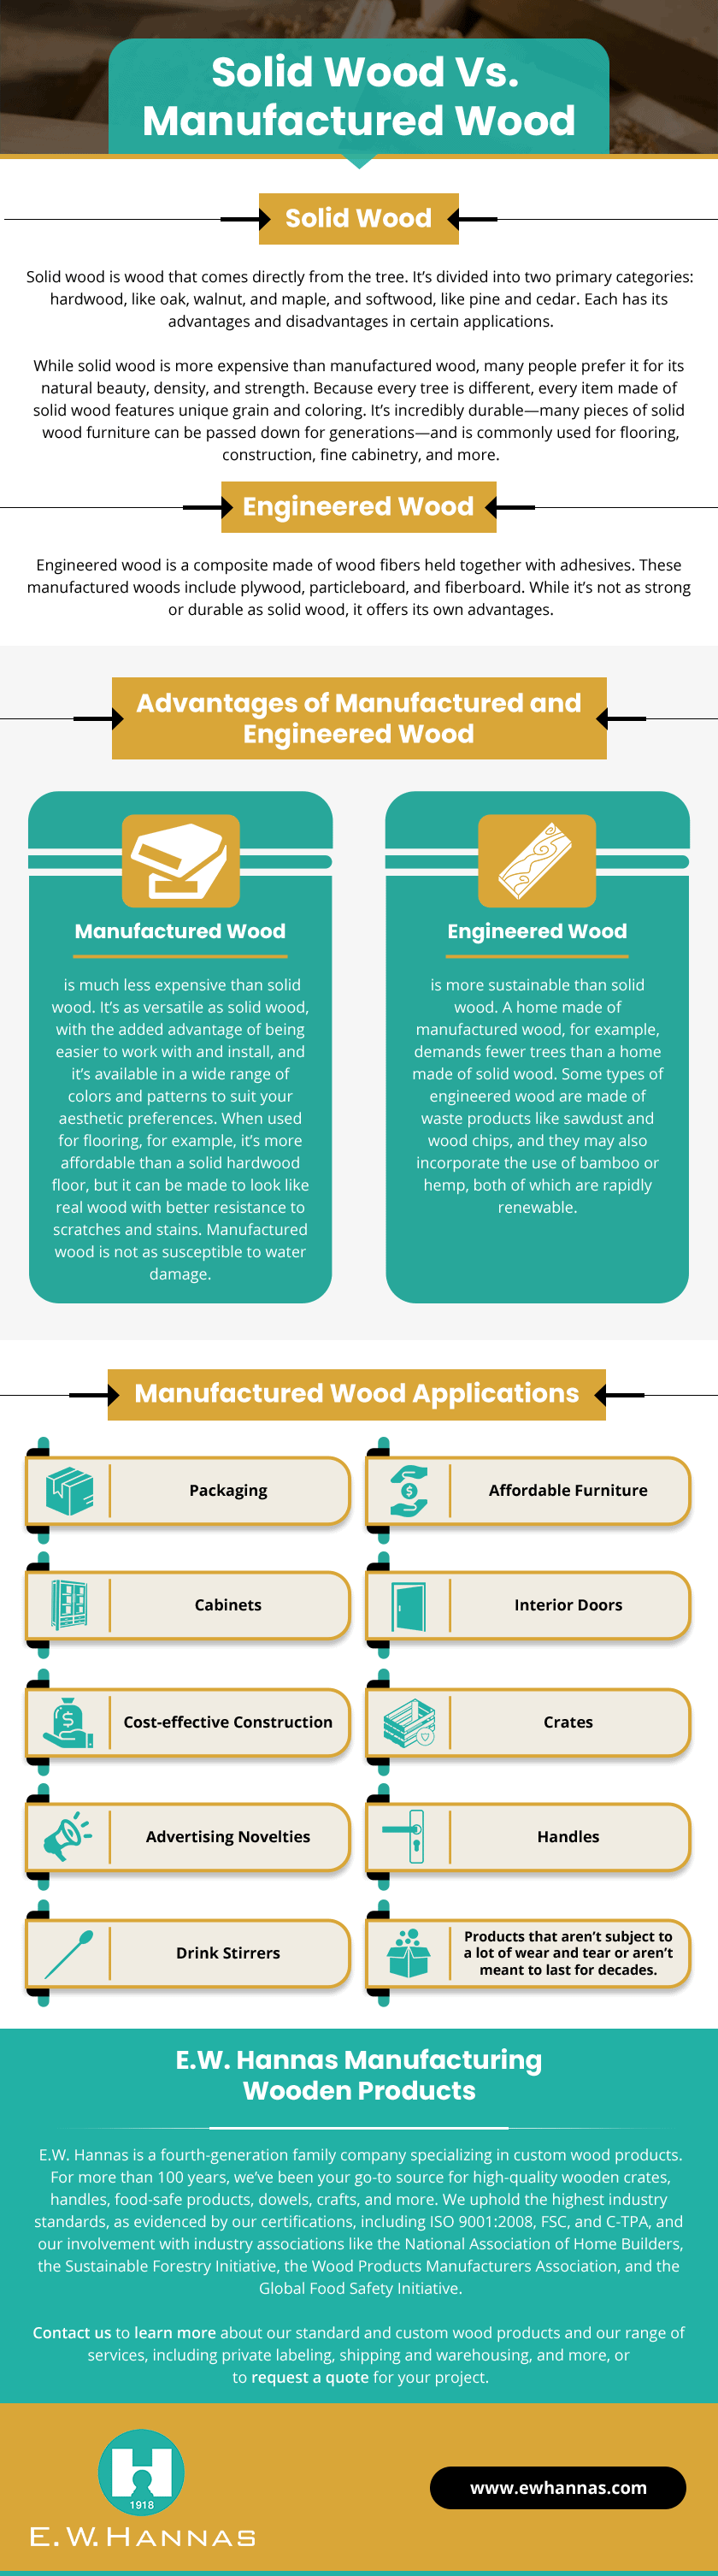 Solid Wood vs Manufactured Wood